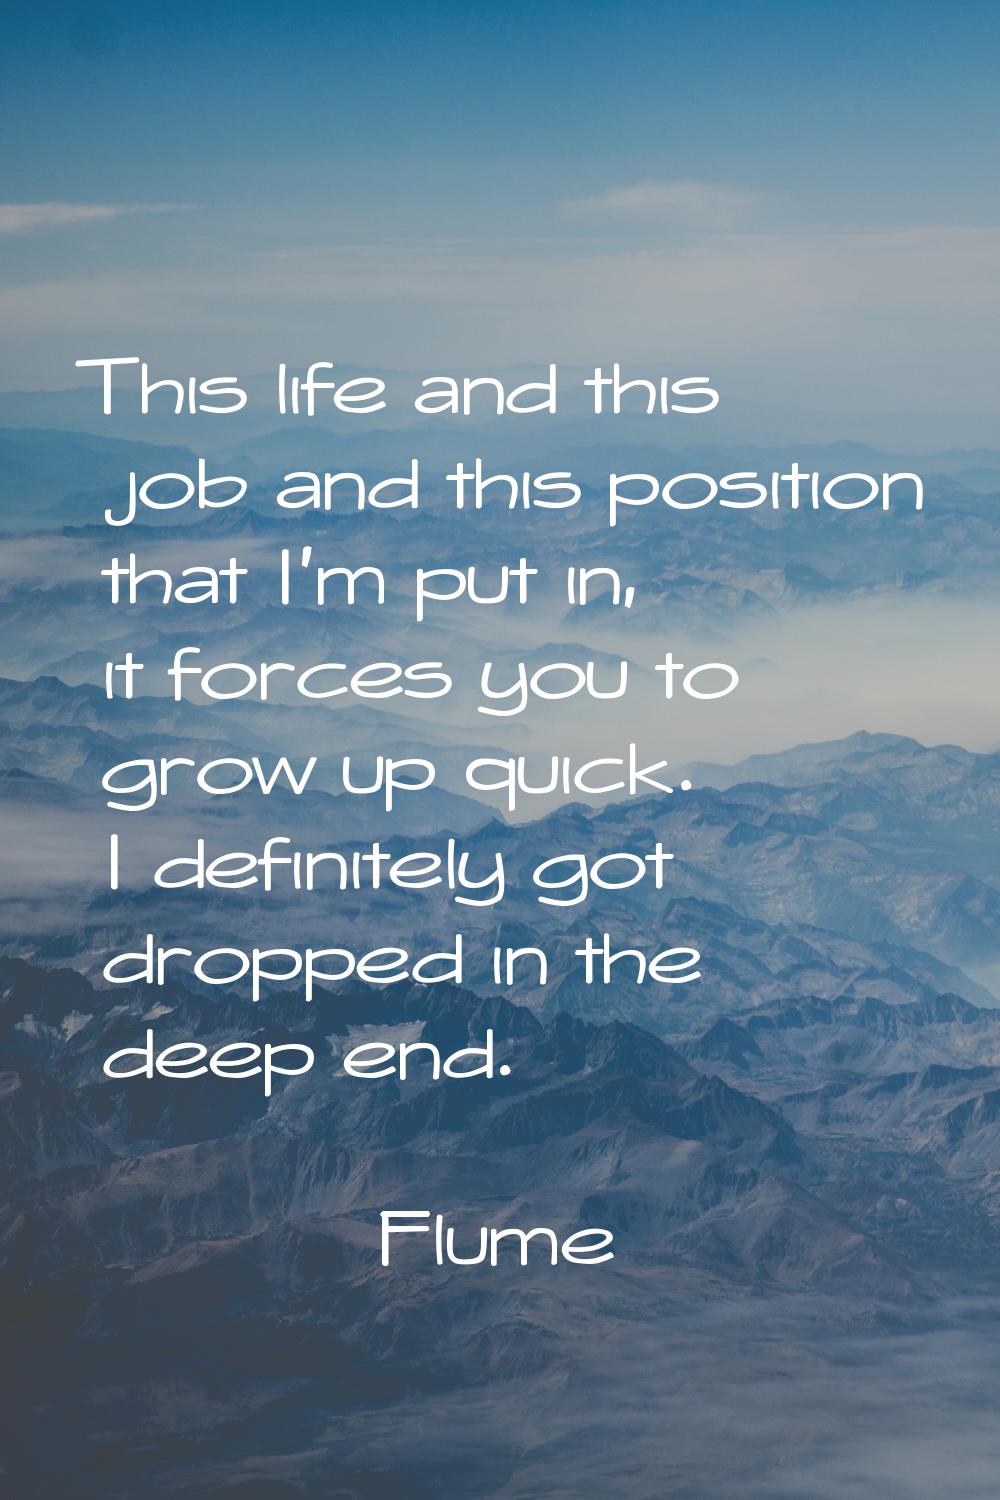 This life and this job and this position that I'm put in, it forces you to grow up quick. I definit